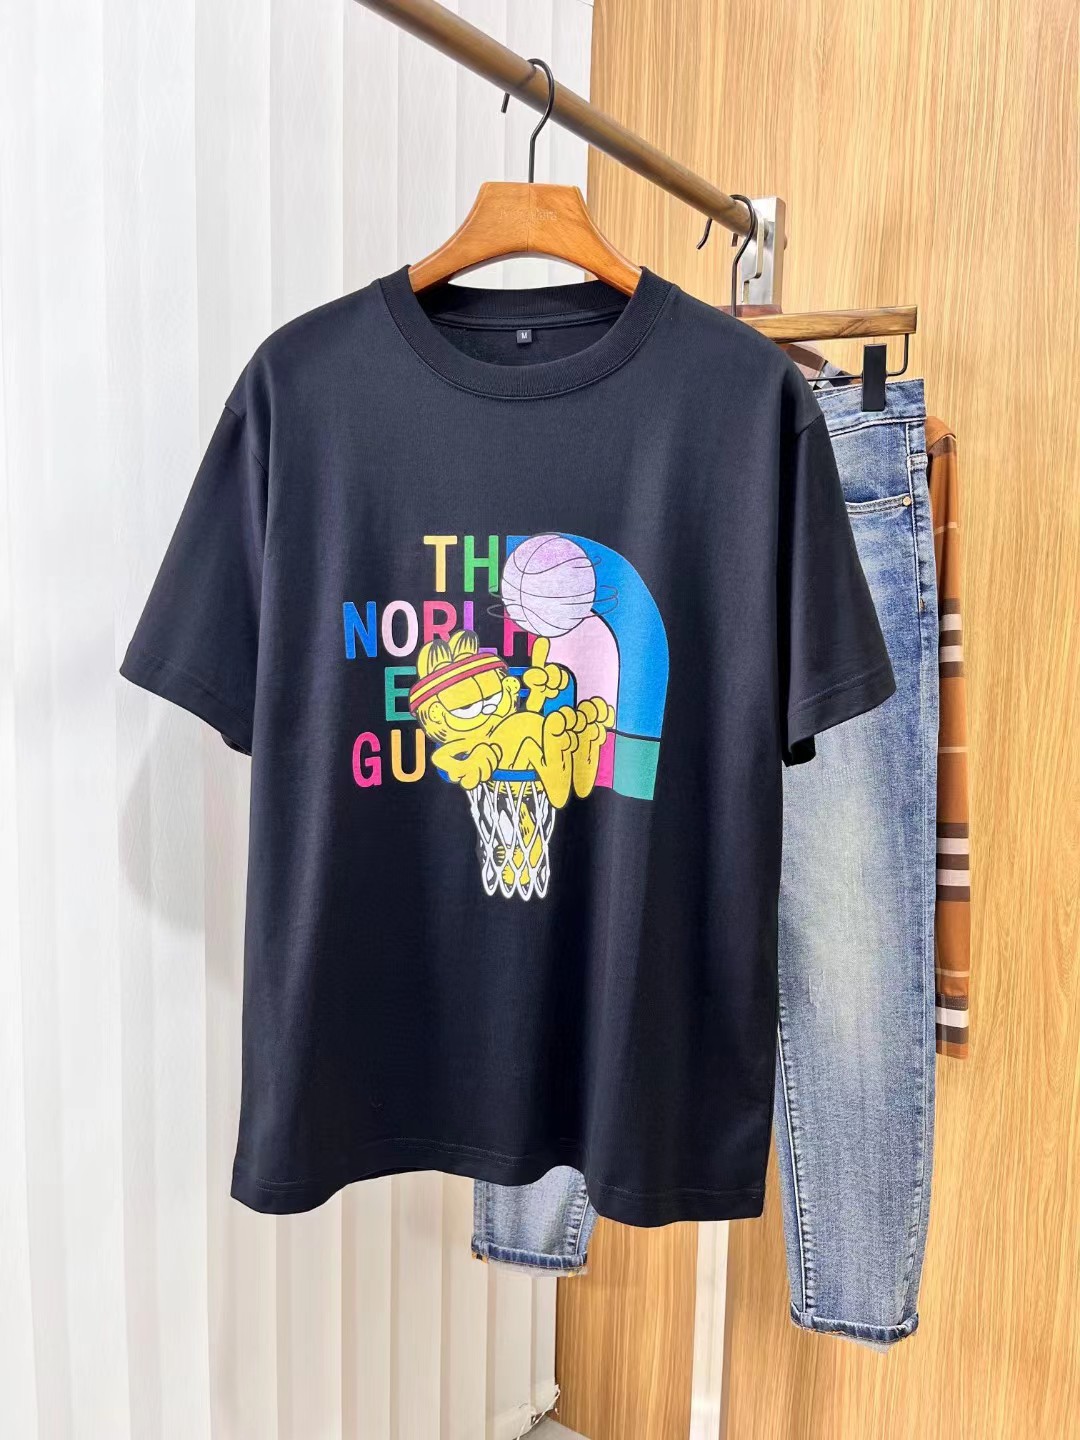 The North Face & Gucci Spring Summer New Design Lovely Garfield Printed Unisex Cotton Leisure T-shirt